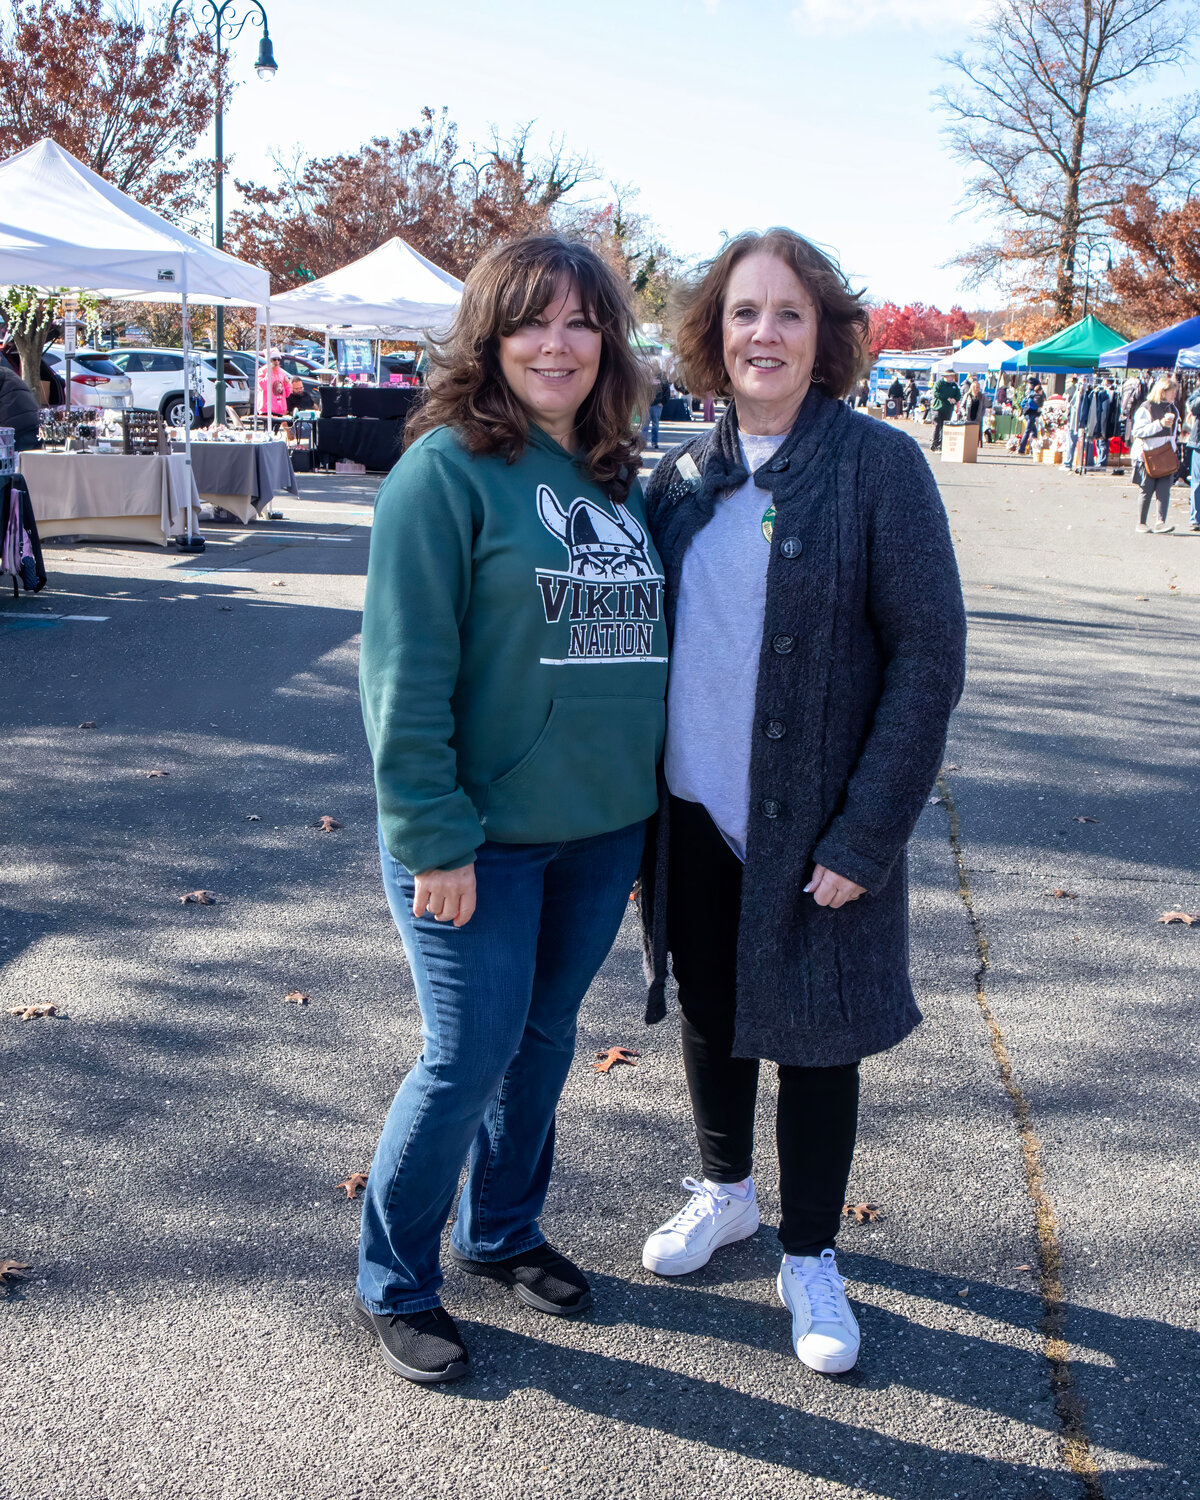 Seaford Chamber of Commerce Vice President Donna Jebaily, left, and President Margaret Grub enjoying the festivities at the Seaford Holiday Fair.